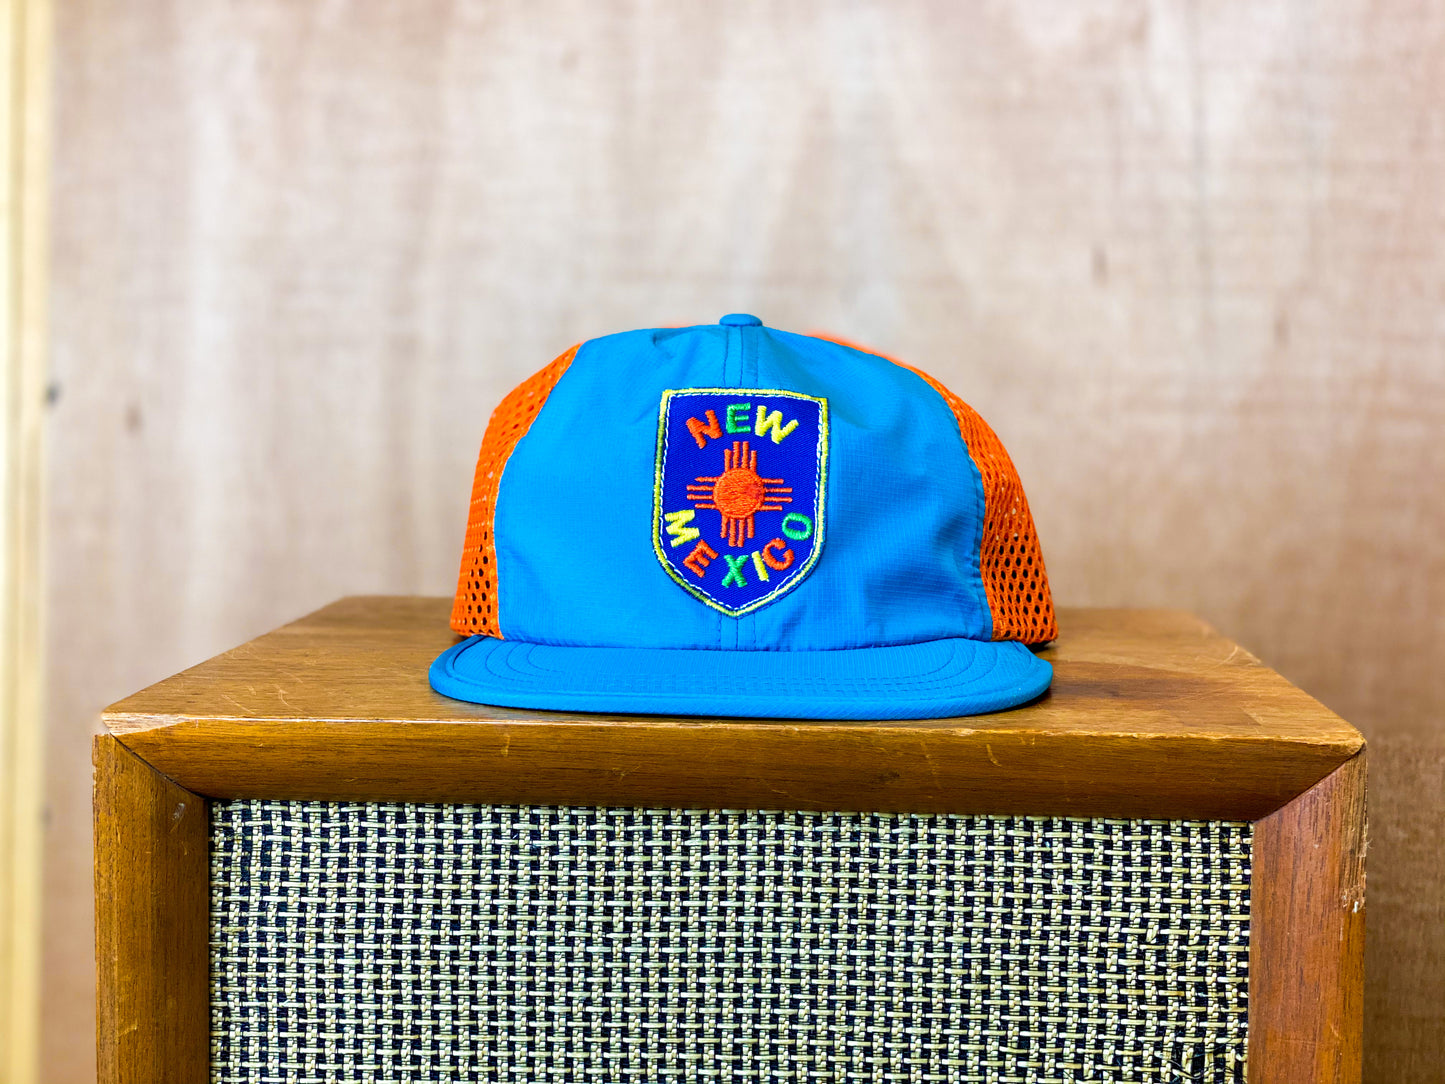 Vintage New Mexico Patch Hat